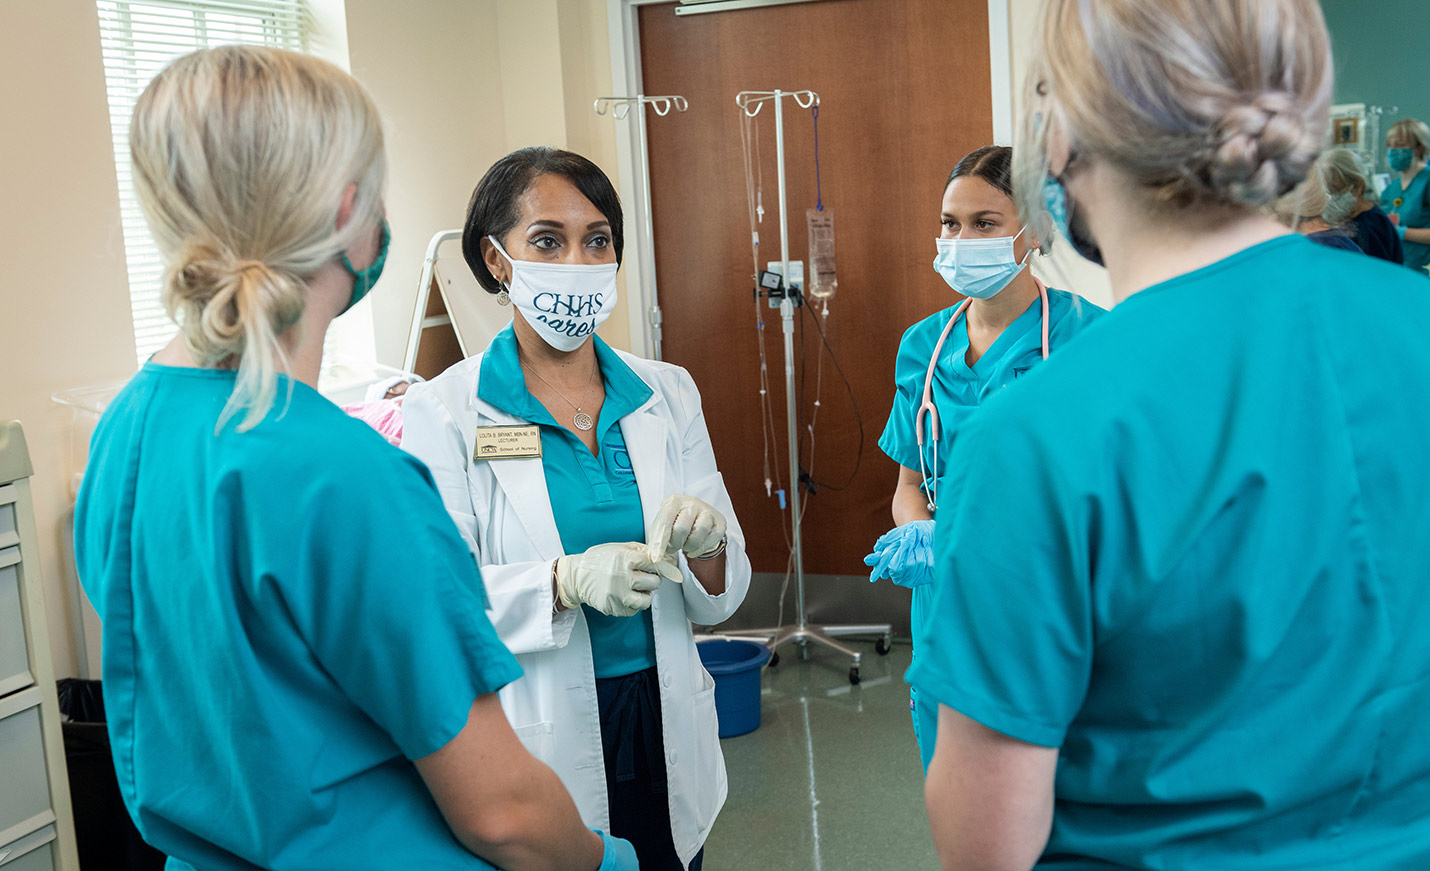 A nursing professor stands with three nursing students forming a semi-circle around her as she lectures to them.